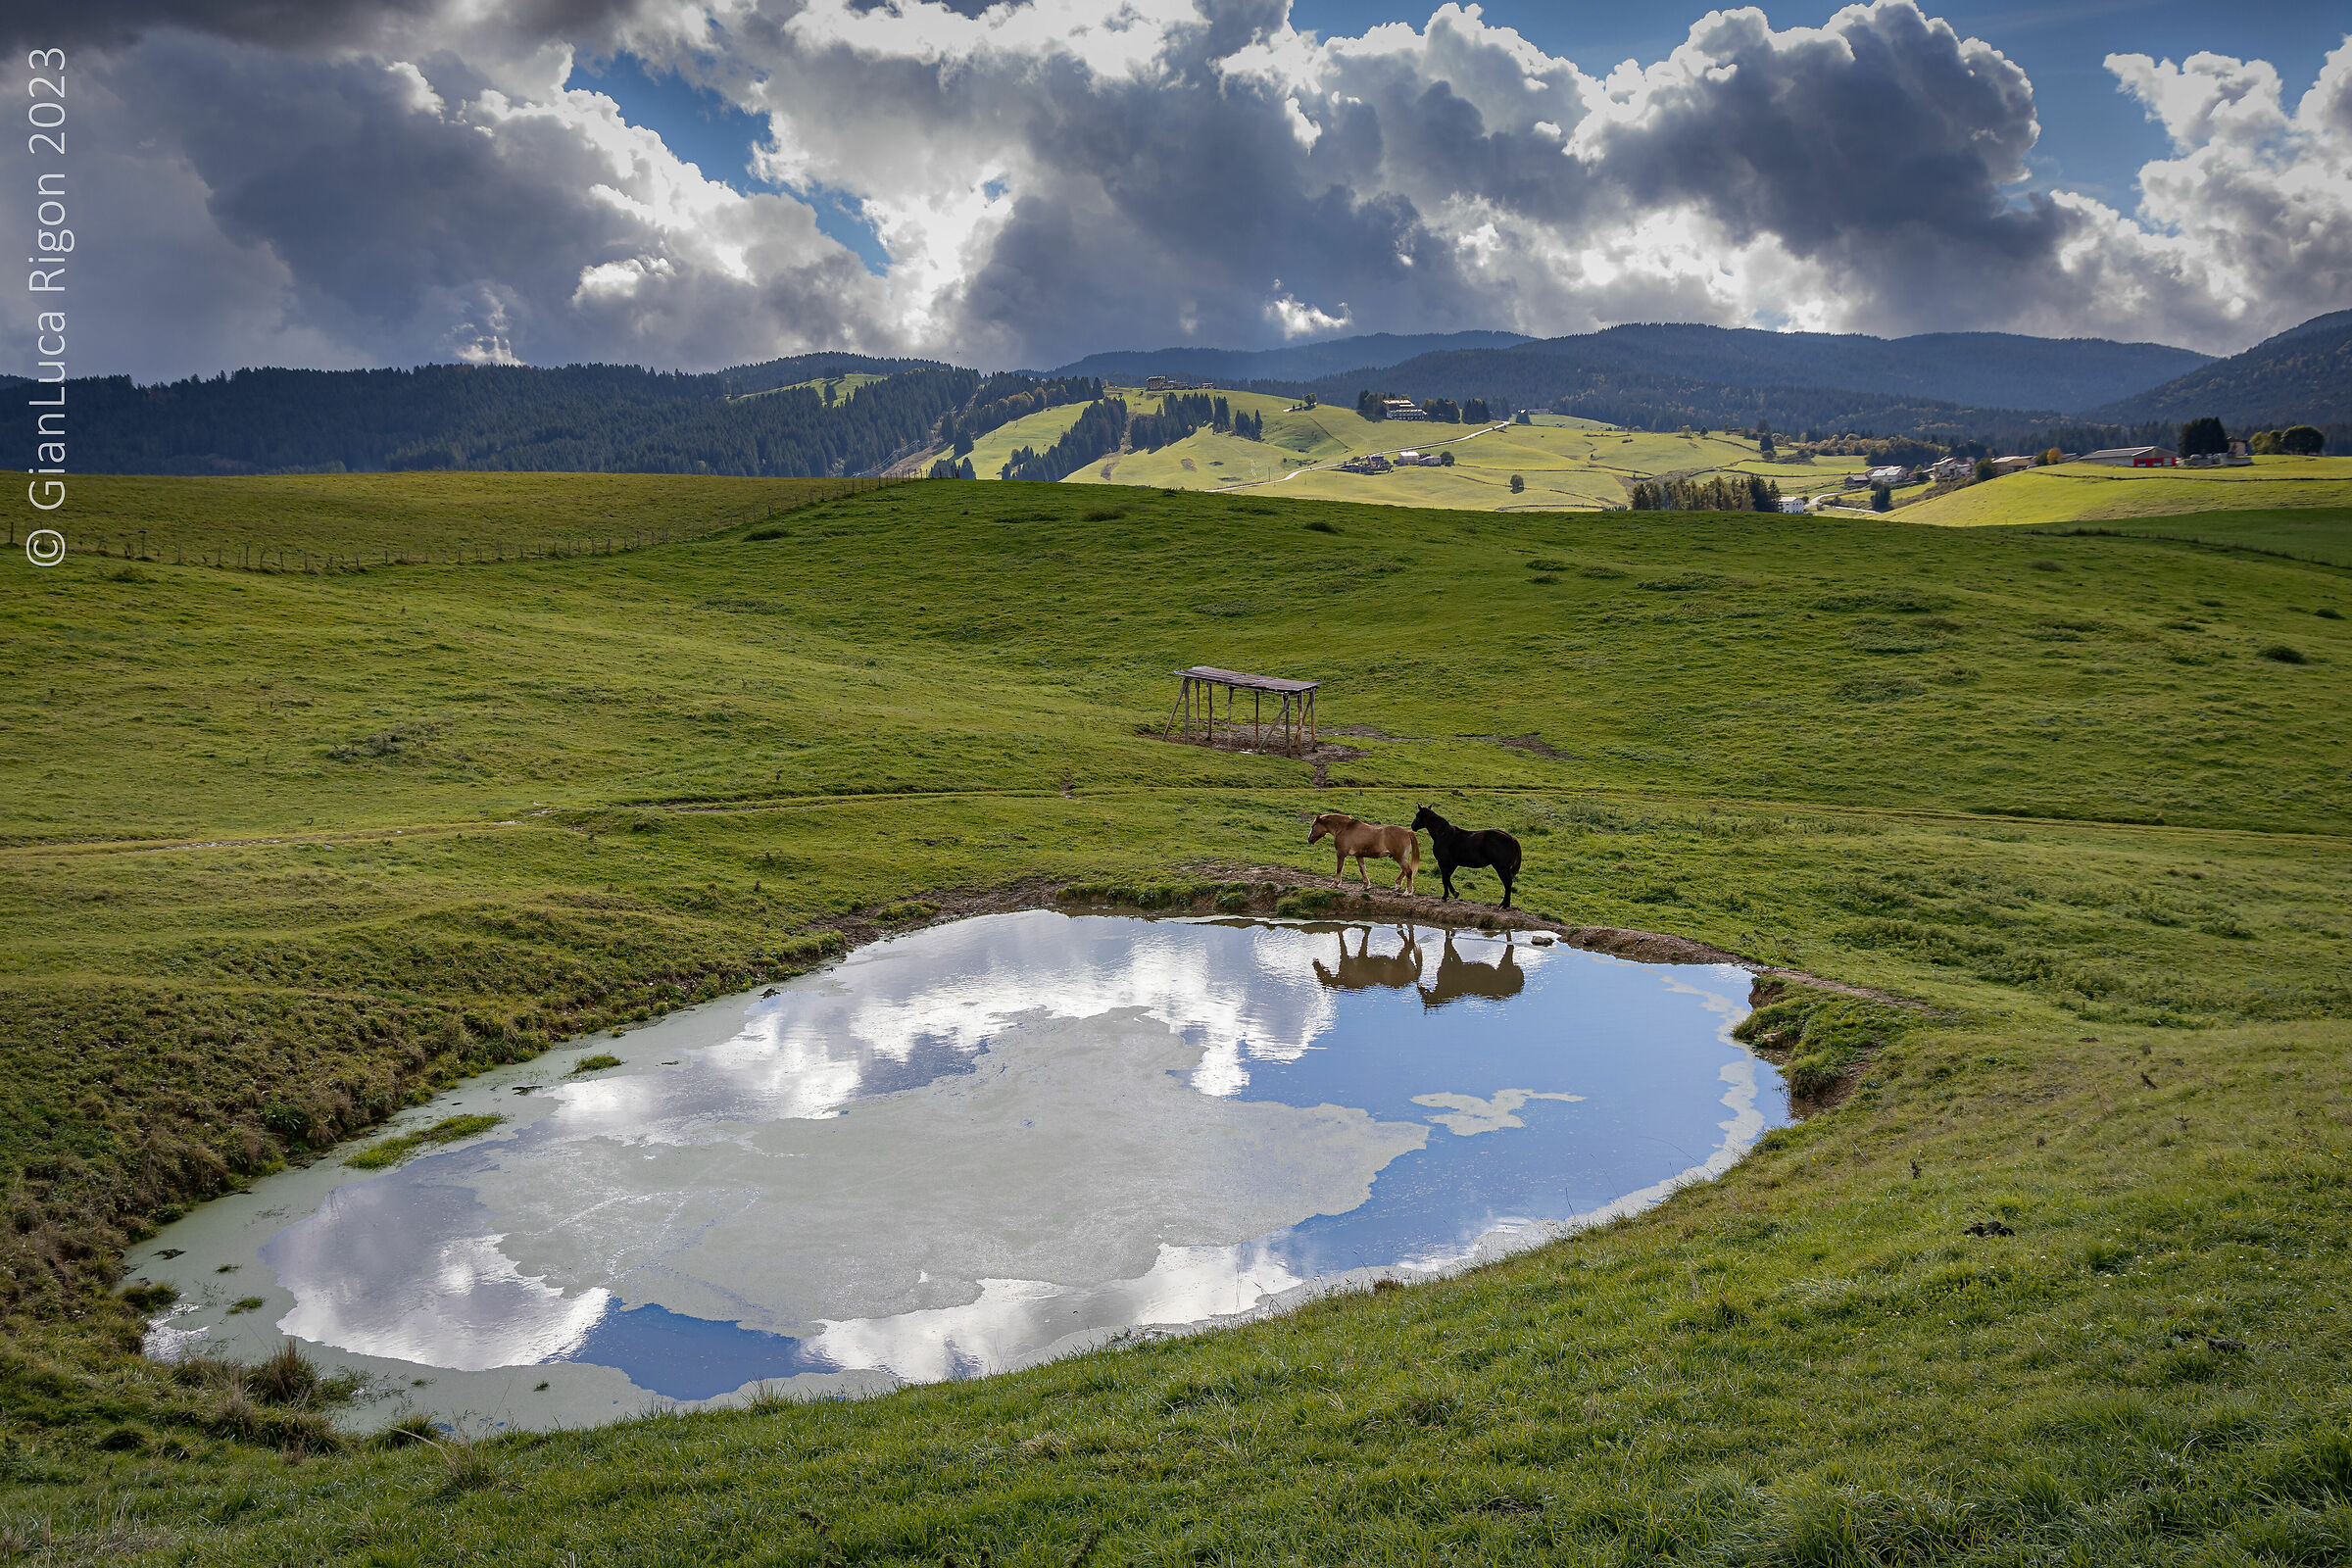 Reflections on the Asiago Plateau...